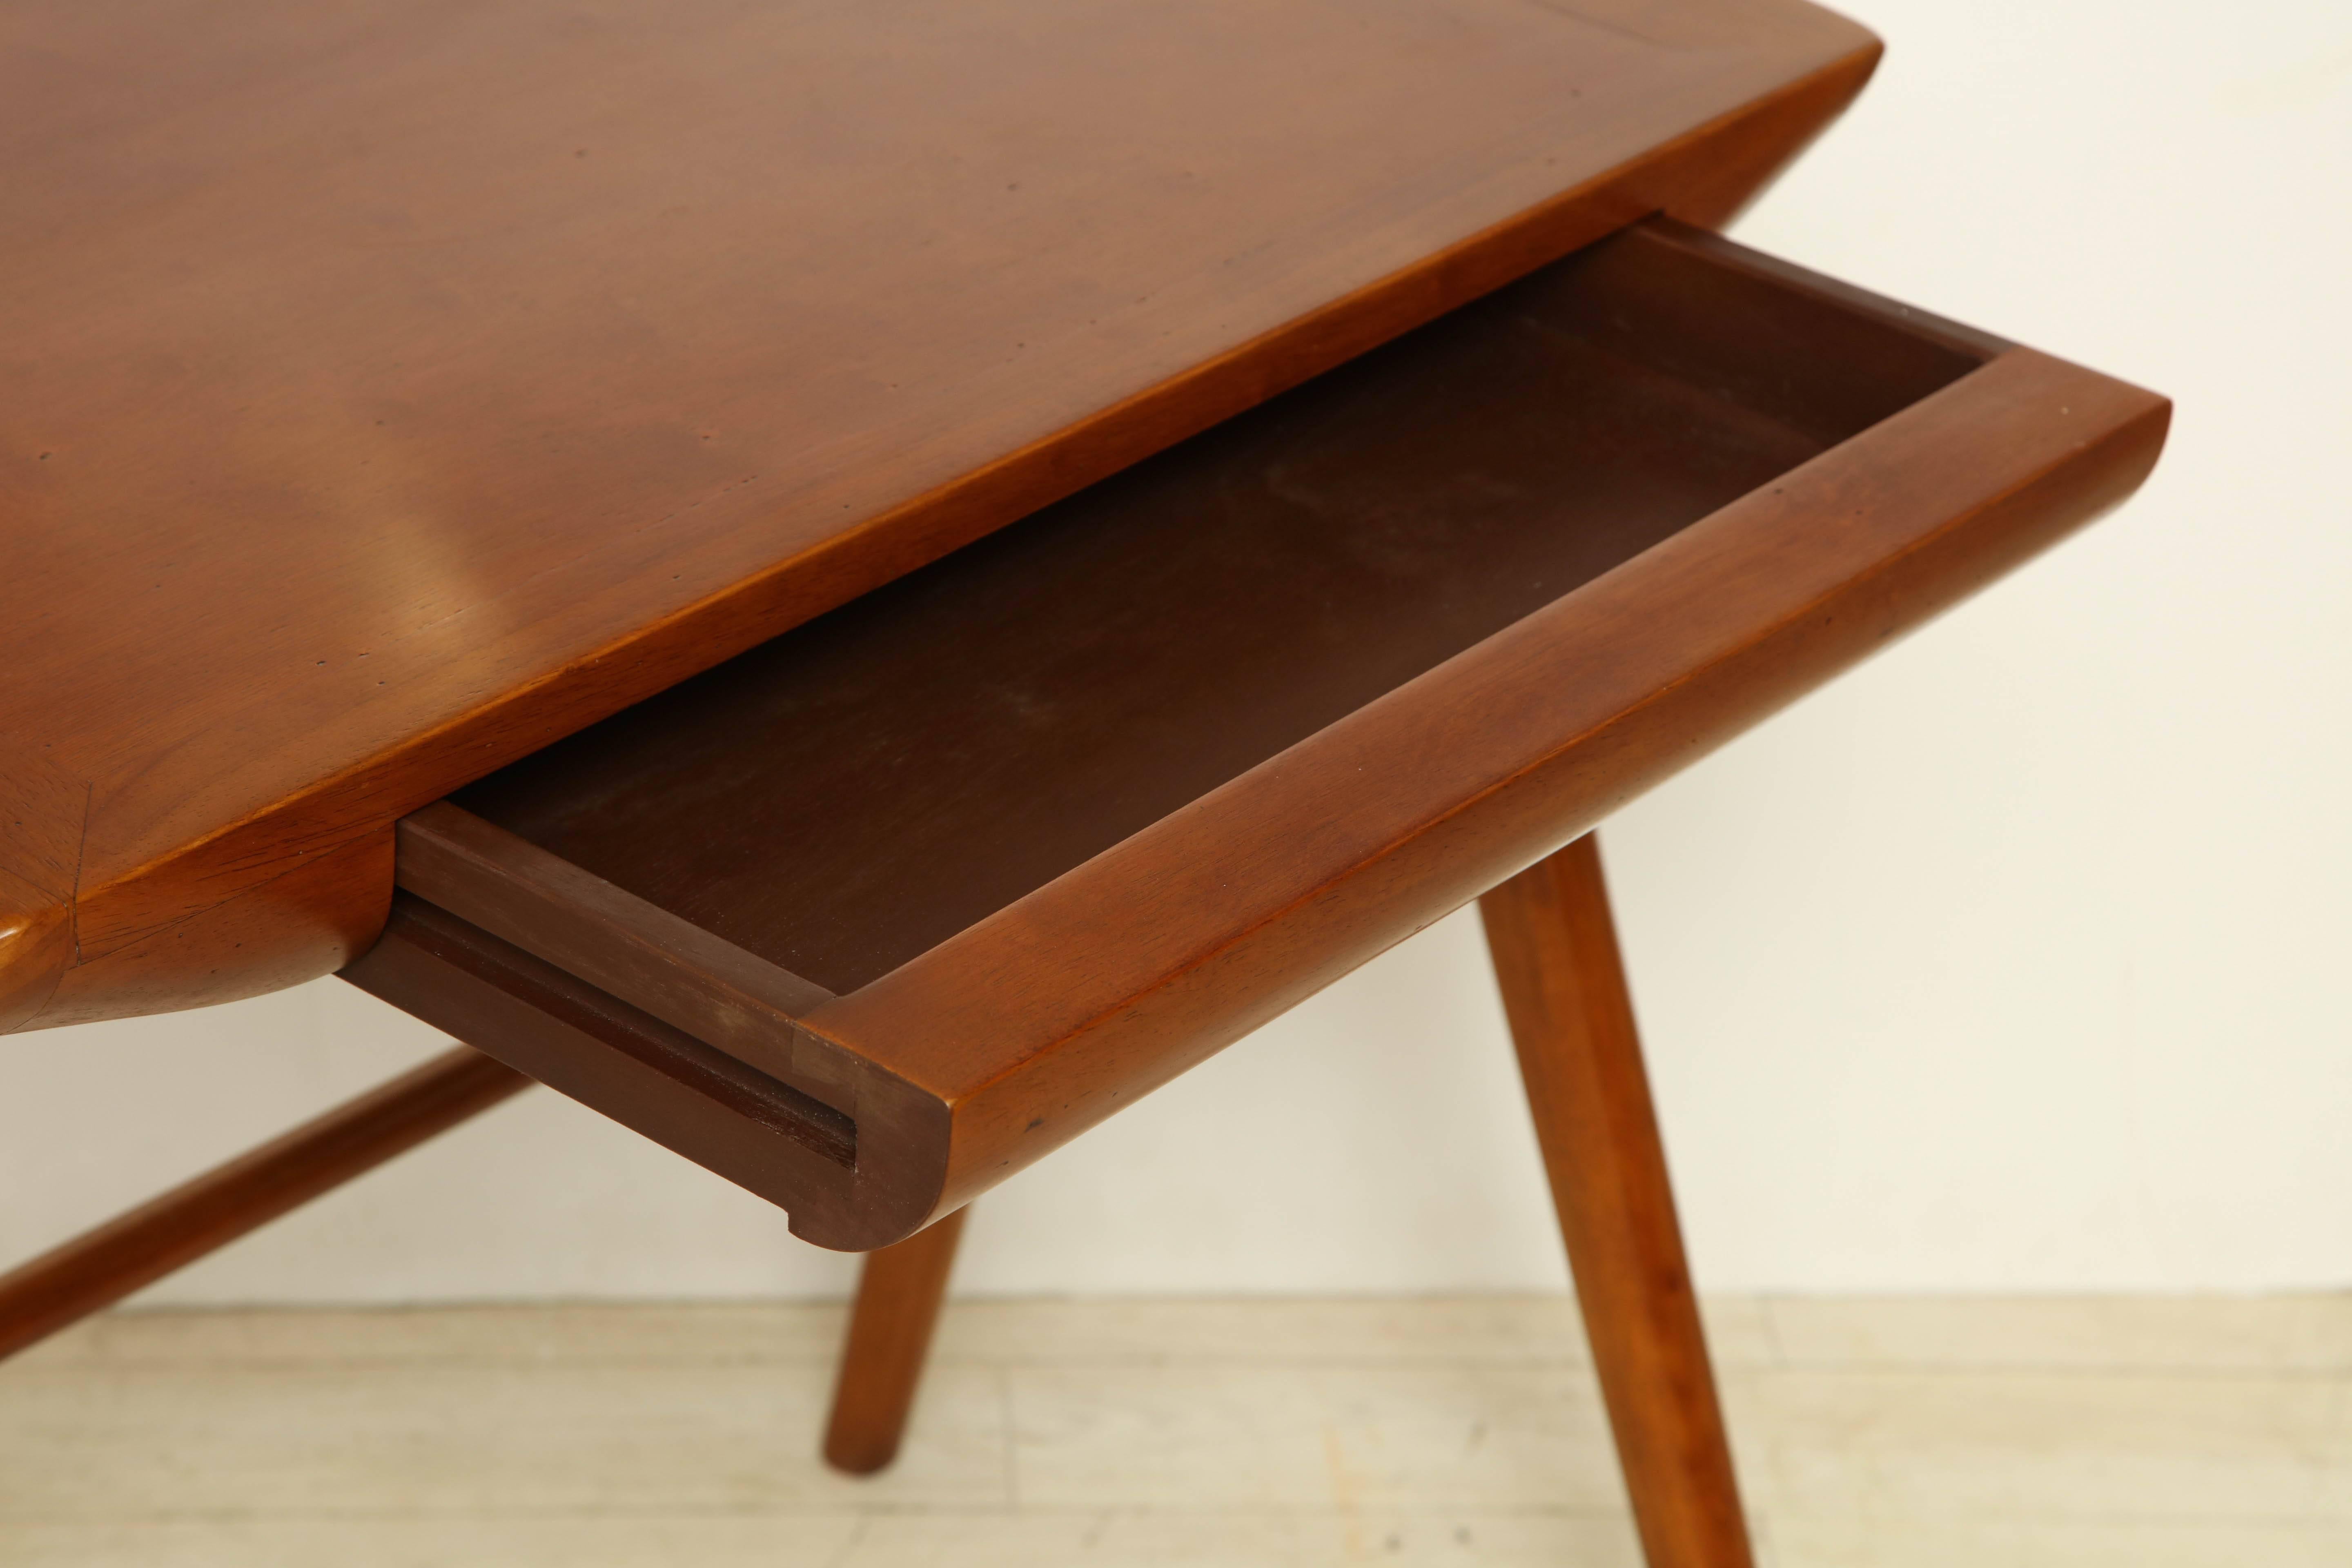 Italian Small Mid-Century Cherry Wood Desk with Matching Chair, France, circa 1960